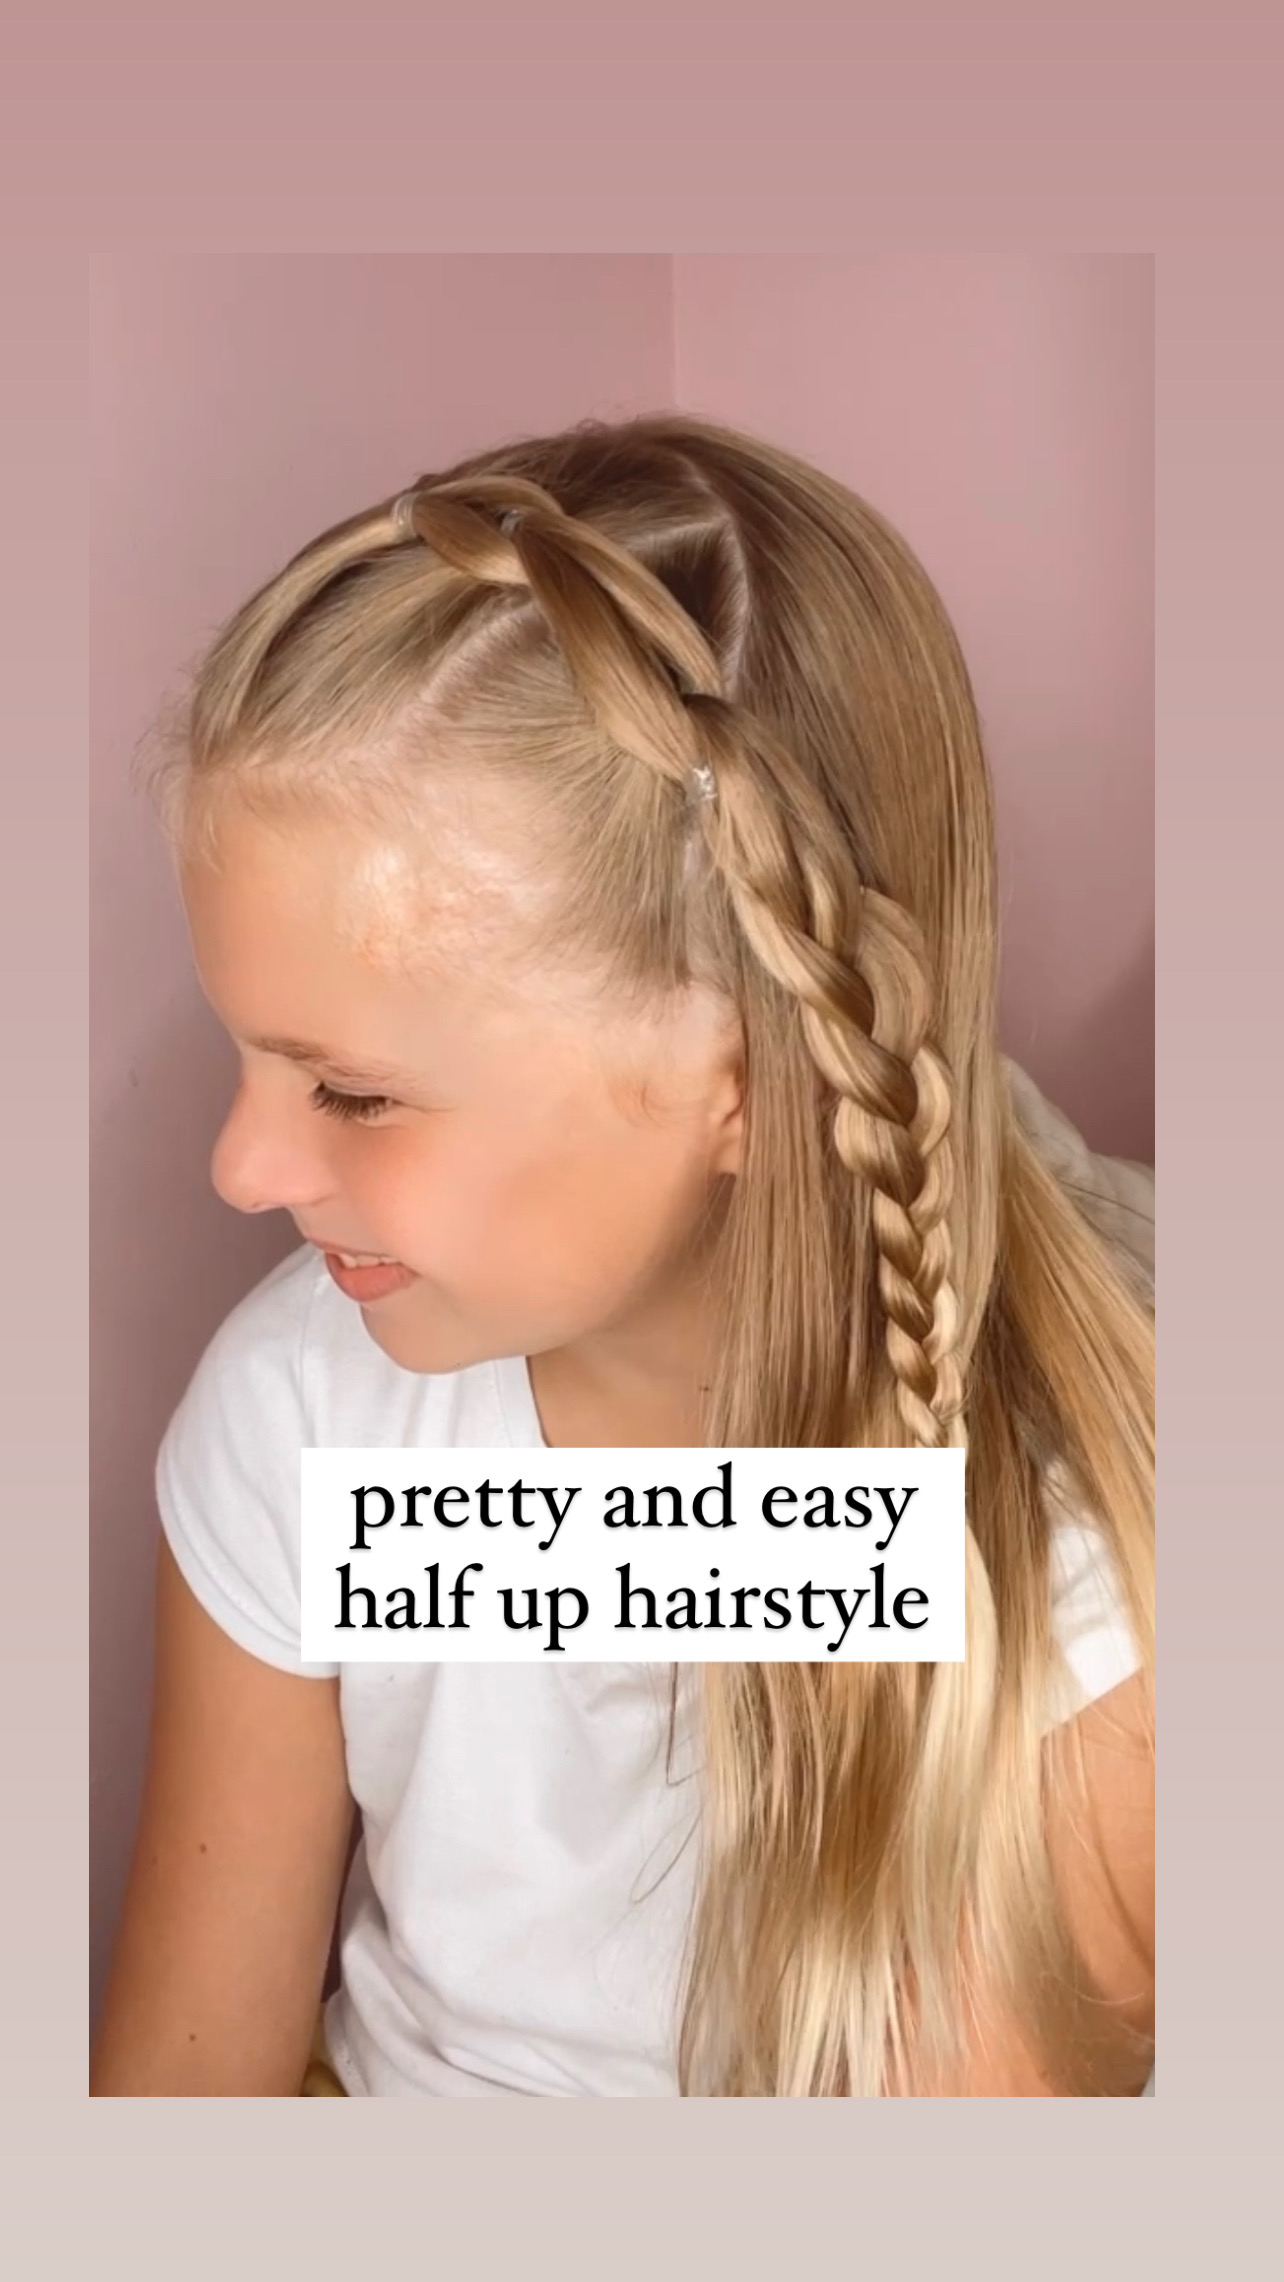 26 Pretty And Easy Braided Hairstyles For Girls To Try | Momjunction